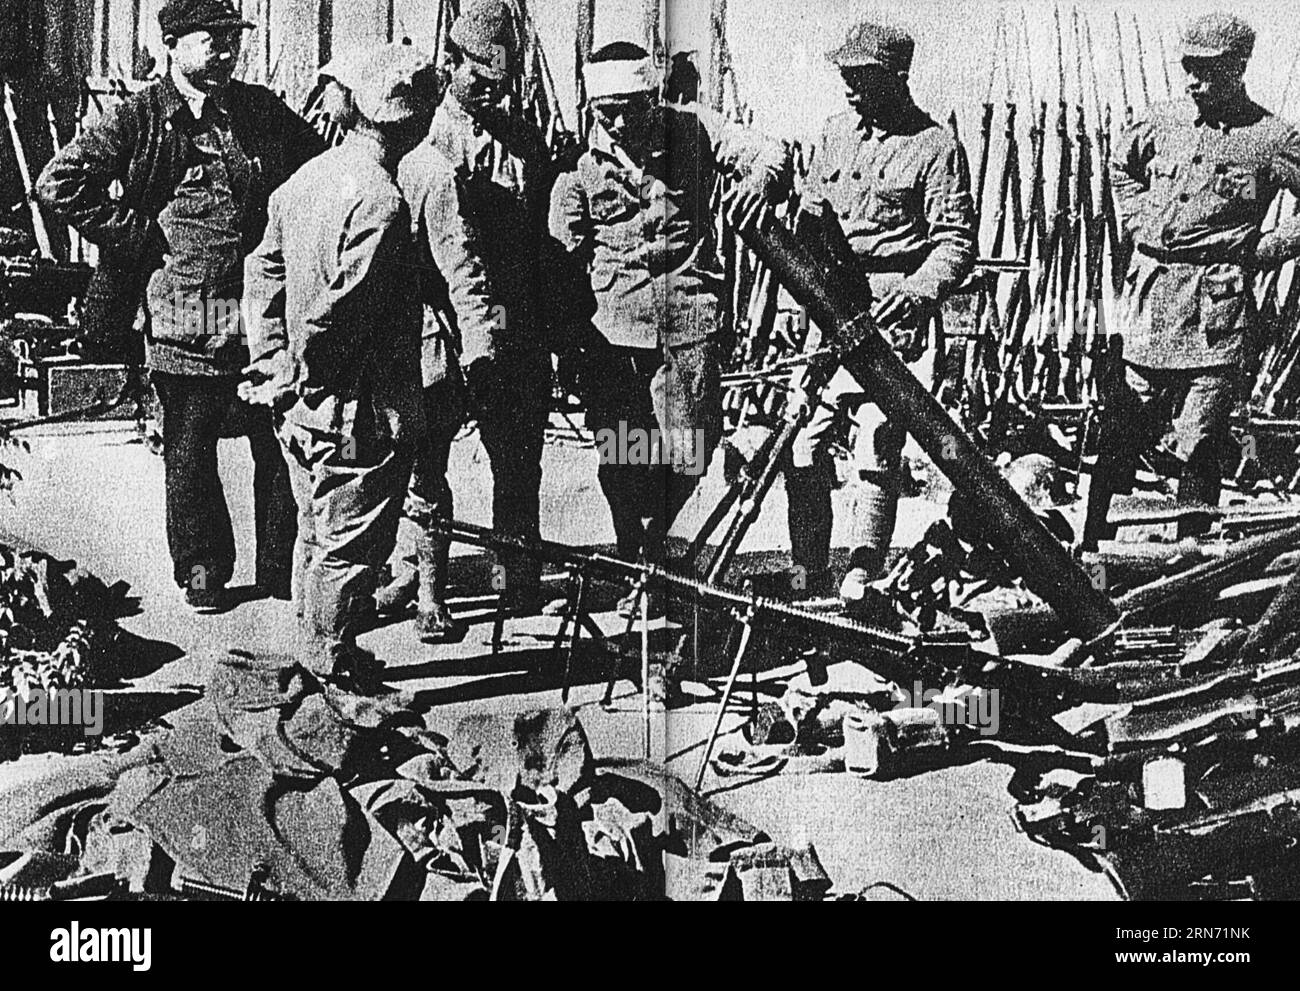 (150813) -- BEIJING, Aug. 13, 2015 () -- File photo shows surrender of Japanese invaders. On Aug. 15, 1945, Japanese Emperor Hirohito delivered a recorded radio address to the nation, announcing the surrender of Japan in World War II, one day after Japan declared its acceptance of the provisions of the Potsdam Proclamation jointly issued by China, the United States and Britain on July 26, 1945, with the Soviet Union joining later. The proclamation, which radicated Japan s crimes of aggressions during WWII and determined the principles under which Japan is required to behave after the war, is a Stock Photo